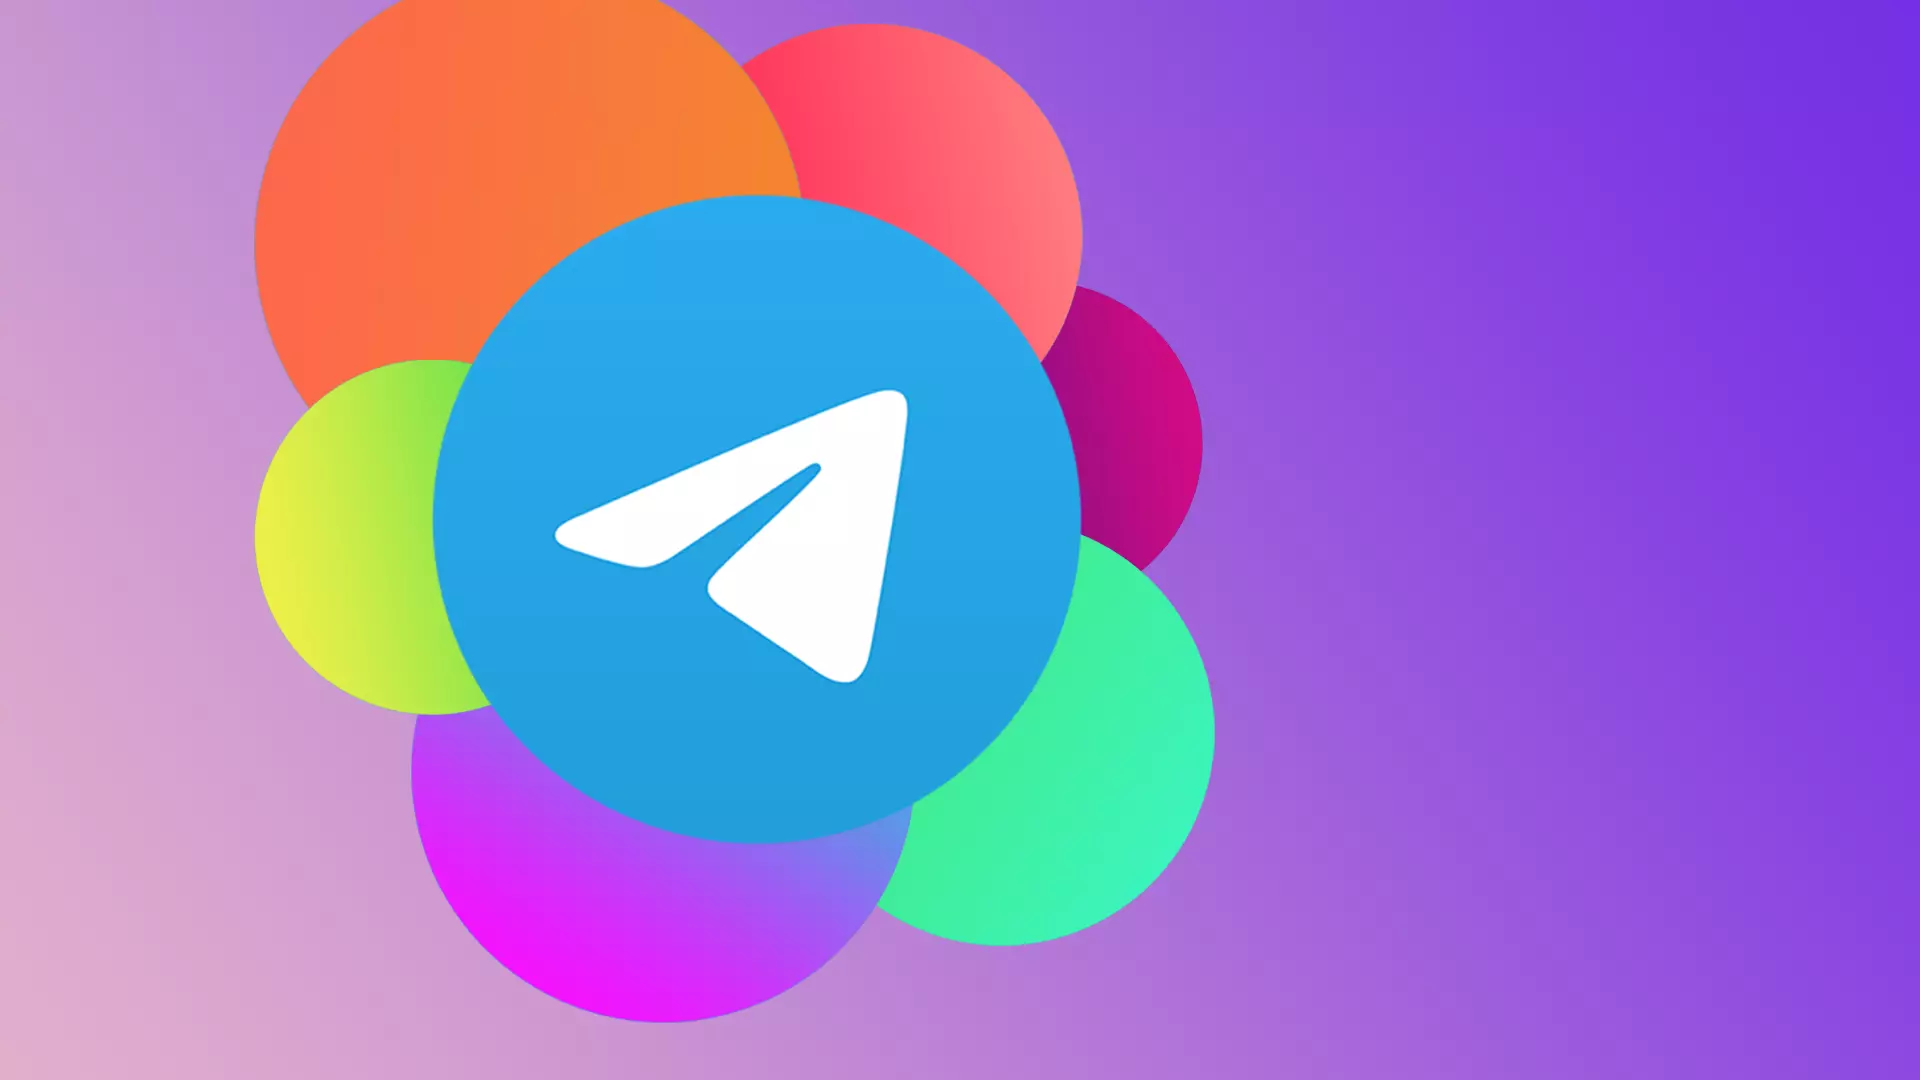 How to delete a Telegram account